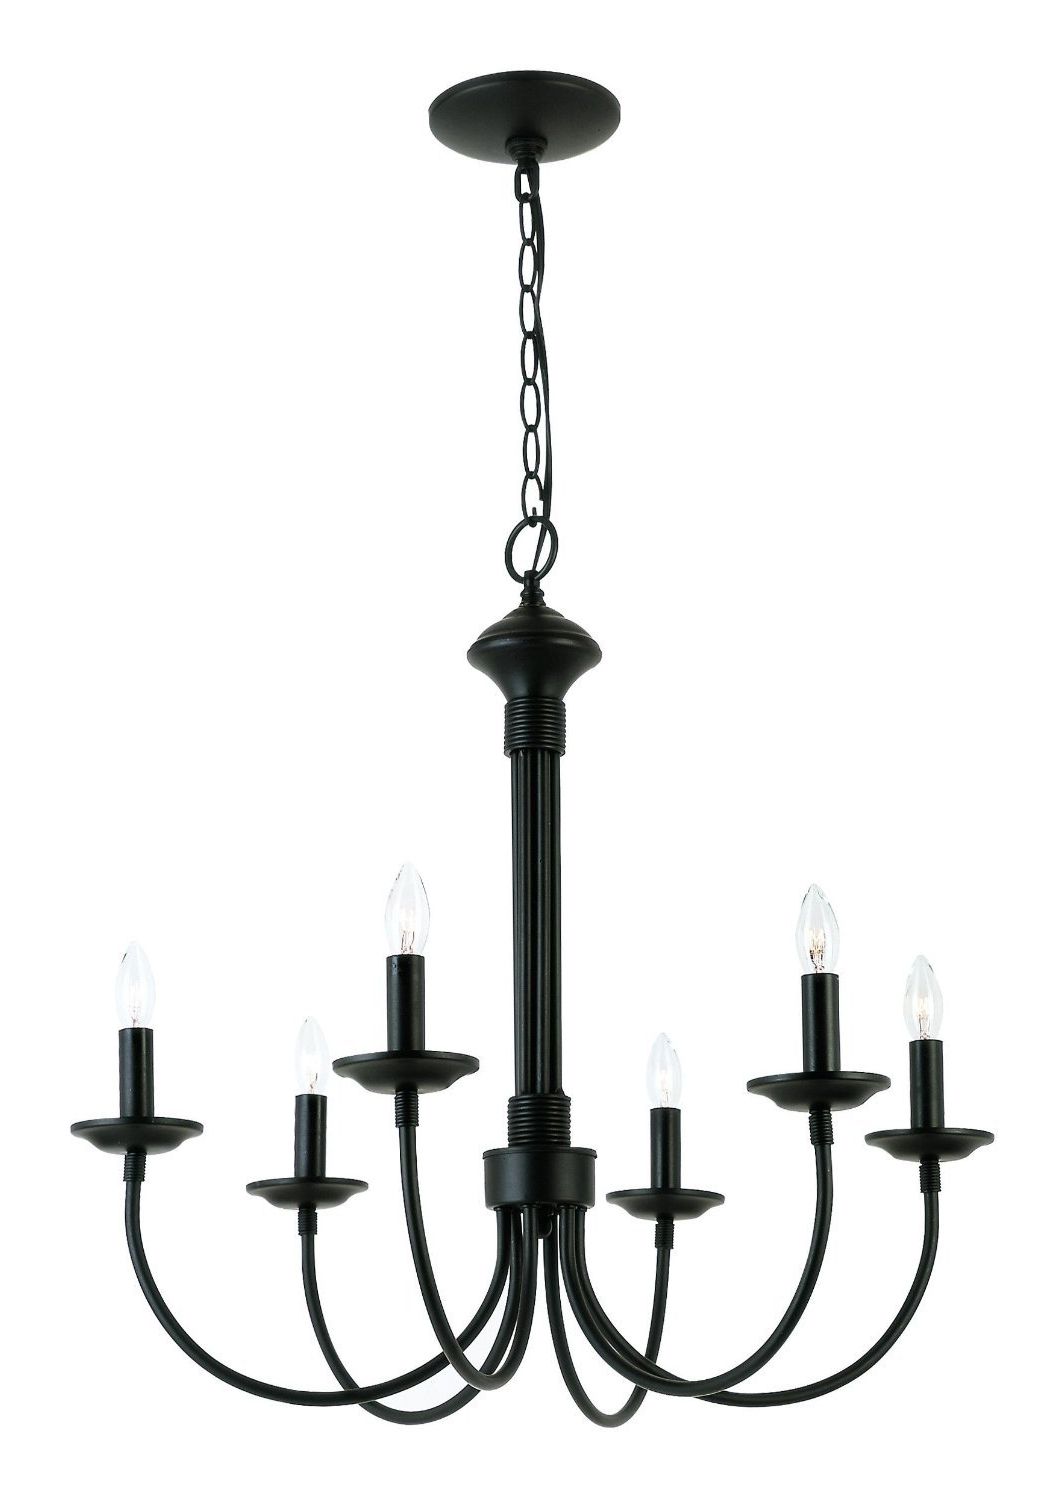 Watford 6 Light Candle Style Chandeliers With Regard To 2020 Laurel Foundry Modern Farmhouse Shaylee 6 Light Candle Style Chandelier (View 25 of 25)